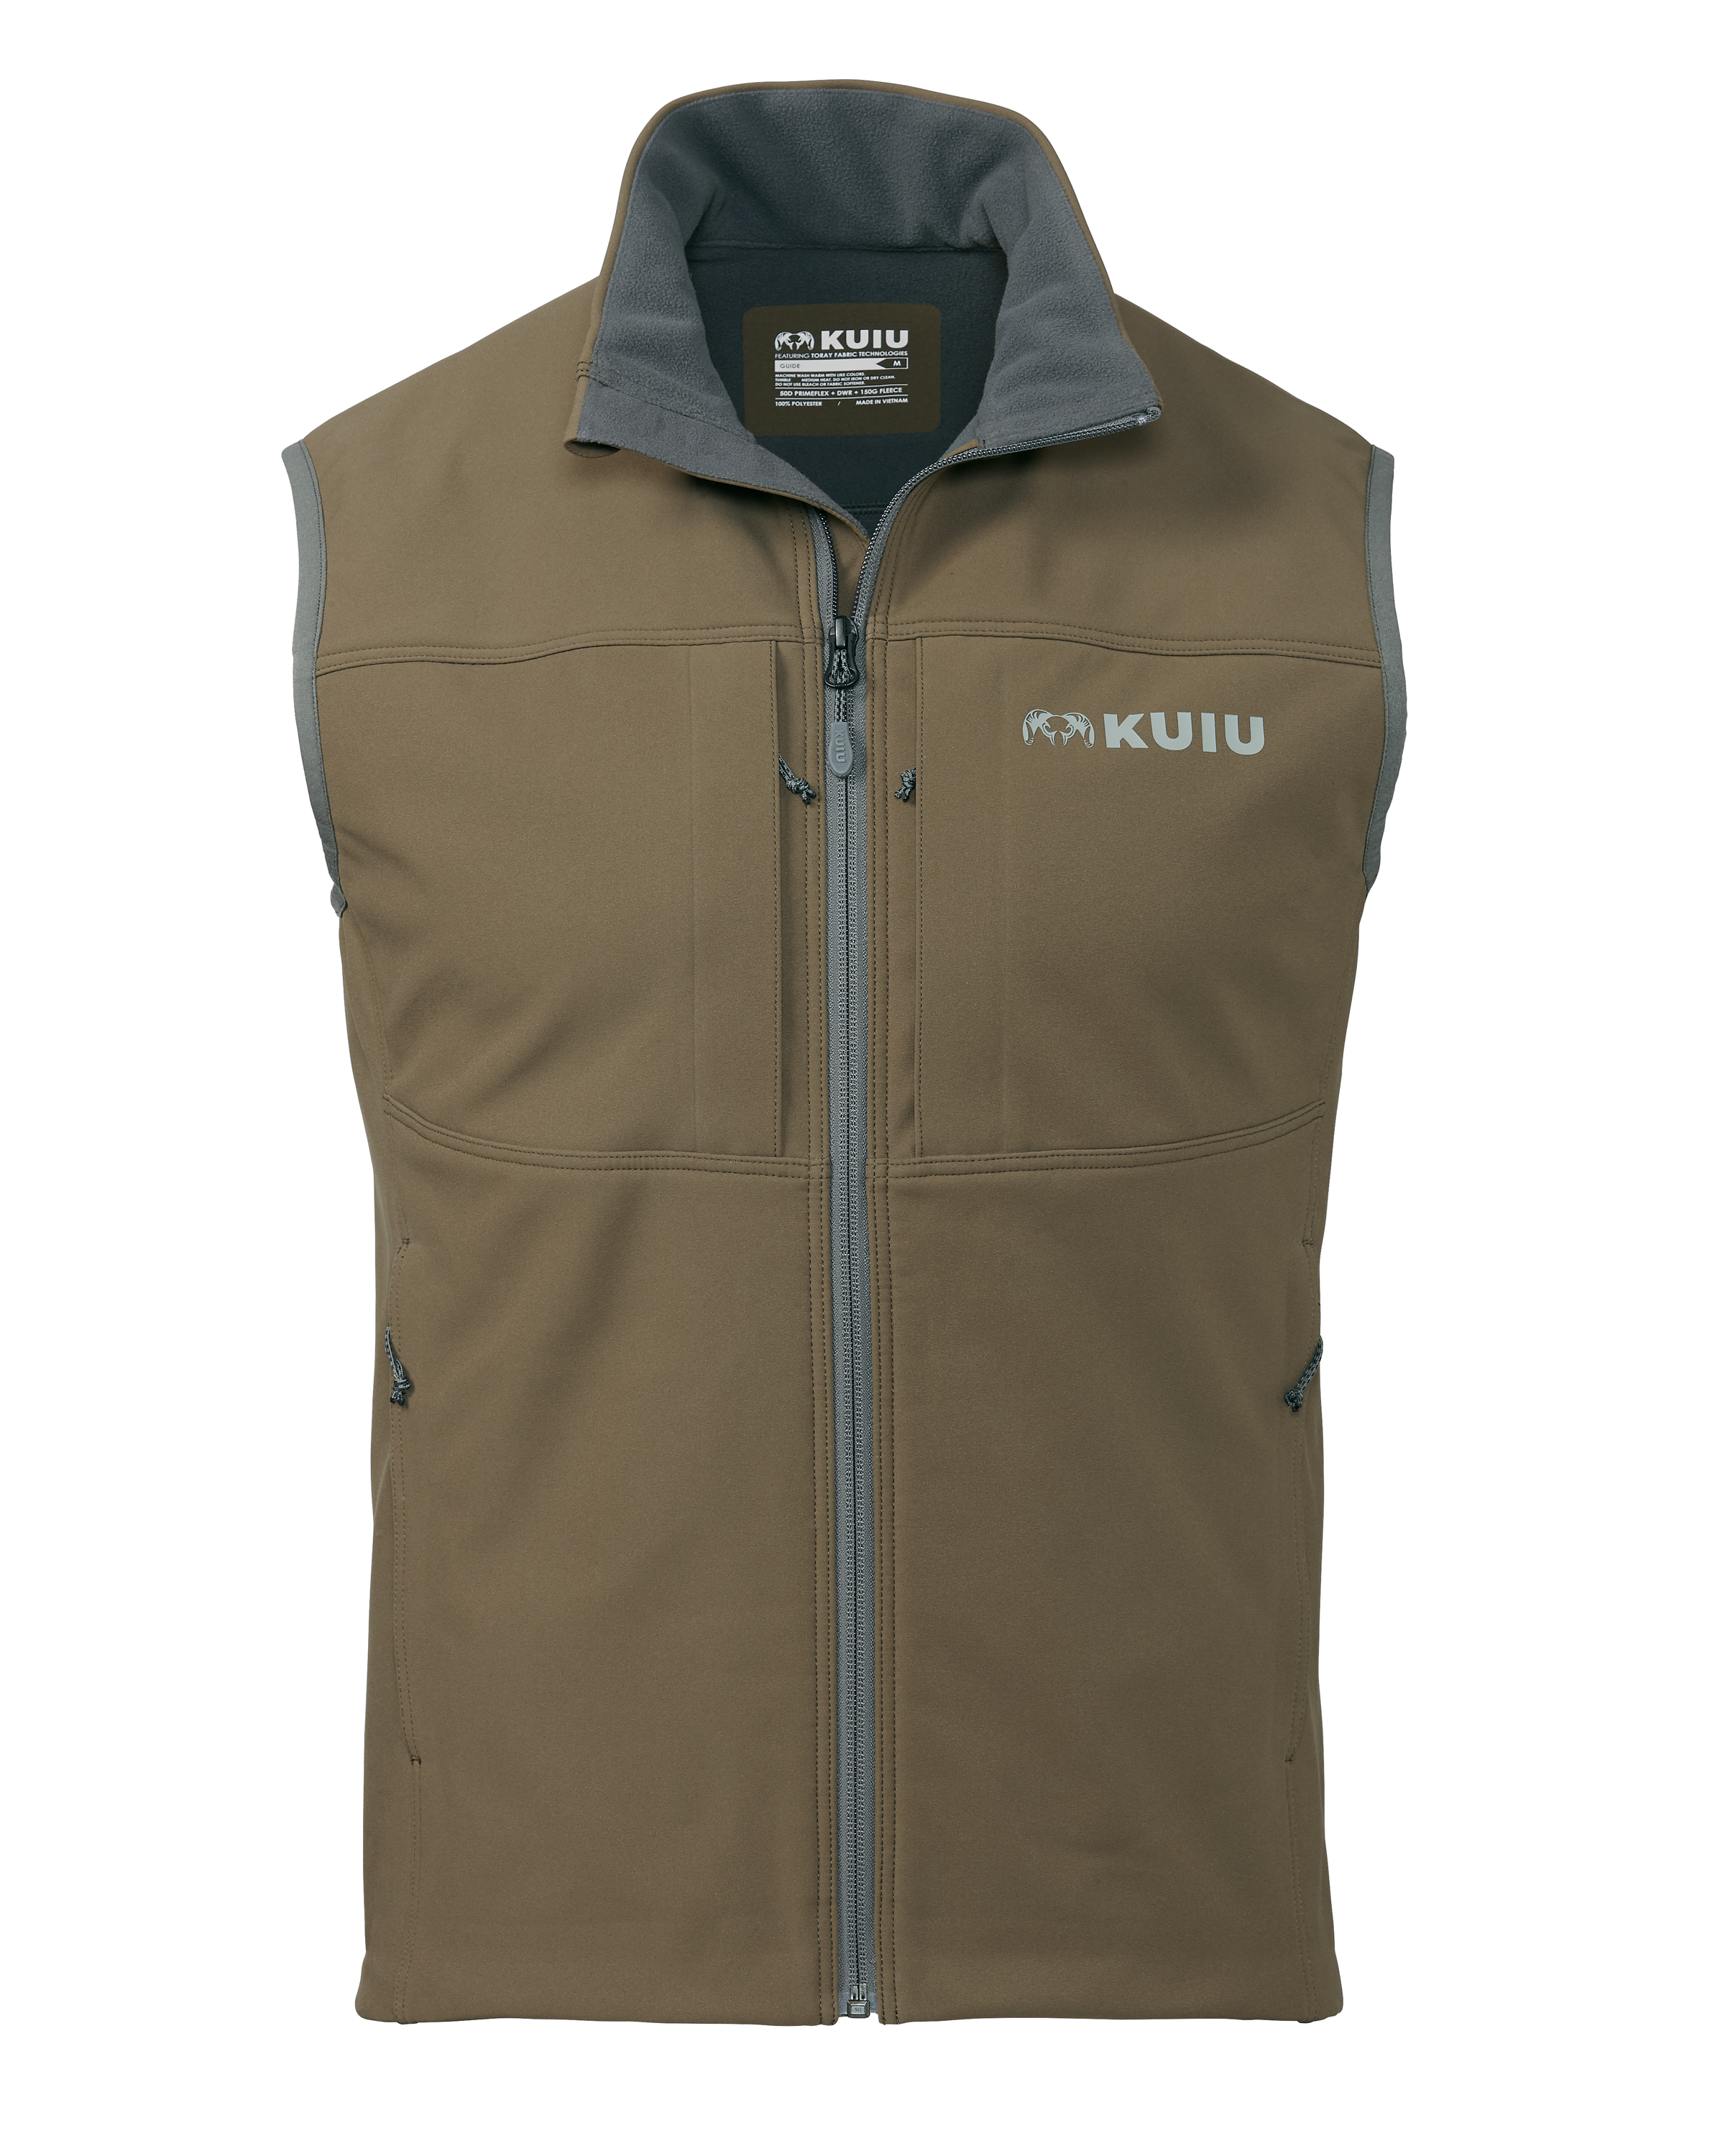 KUIU Guide DCS Hunting Vest in Bourbon | Size 3XL